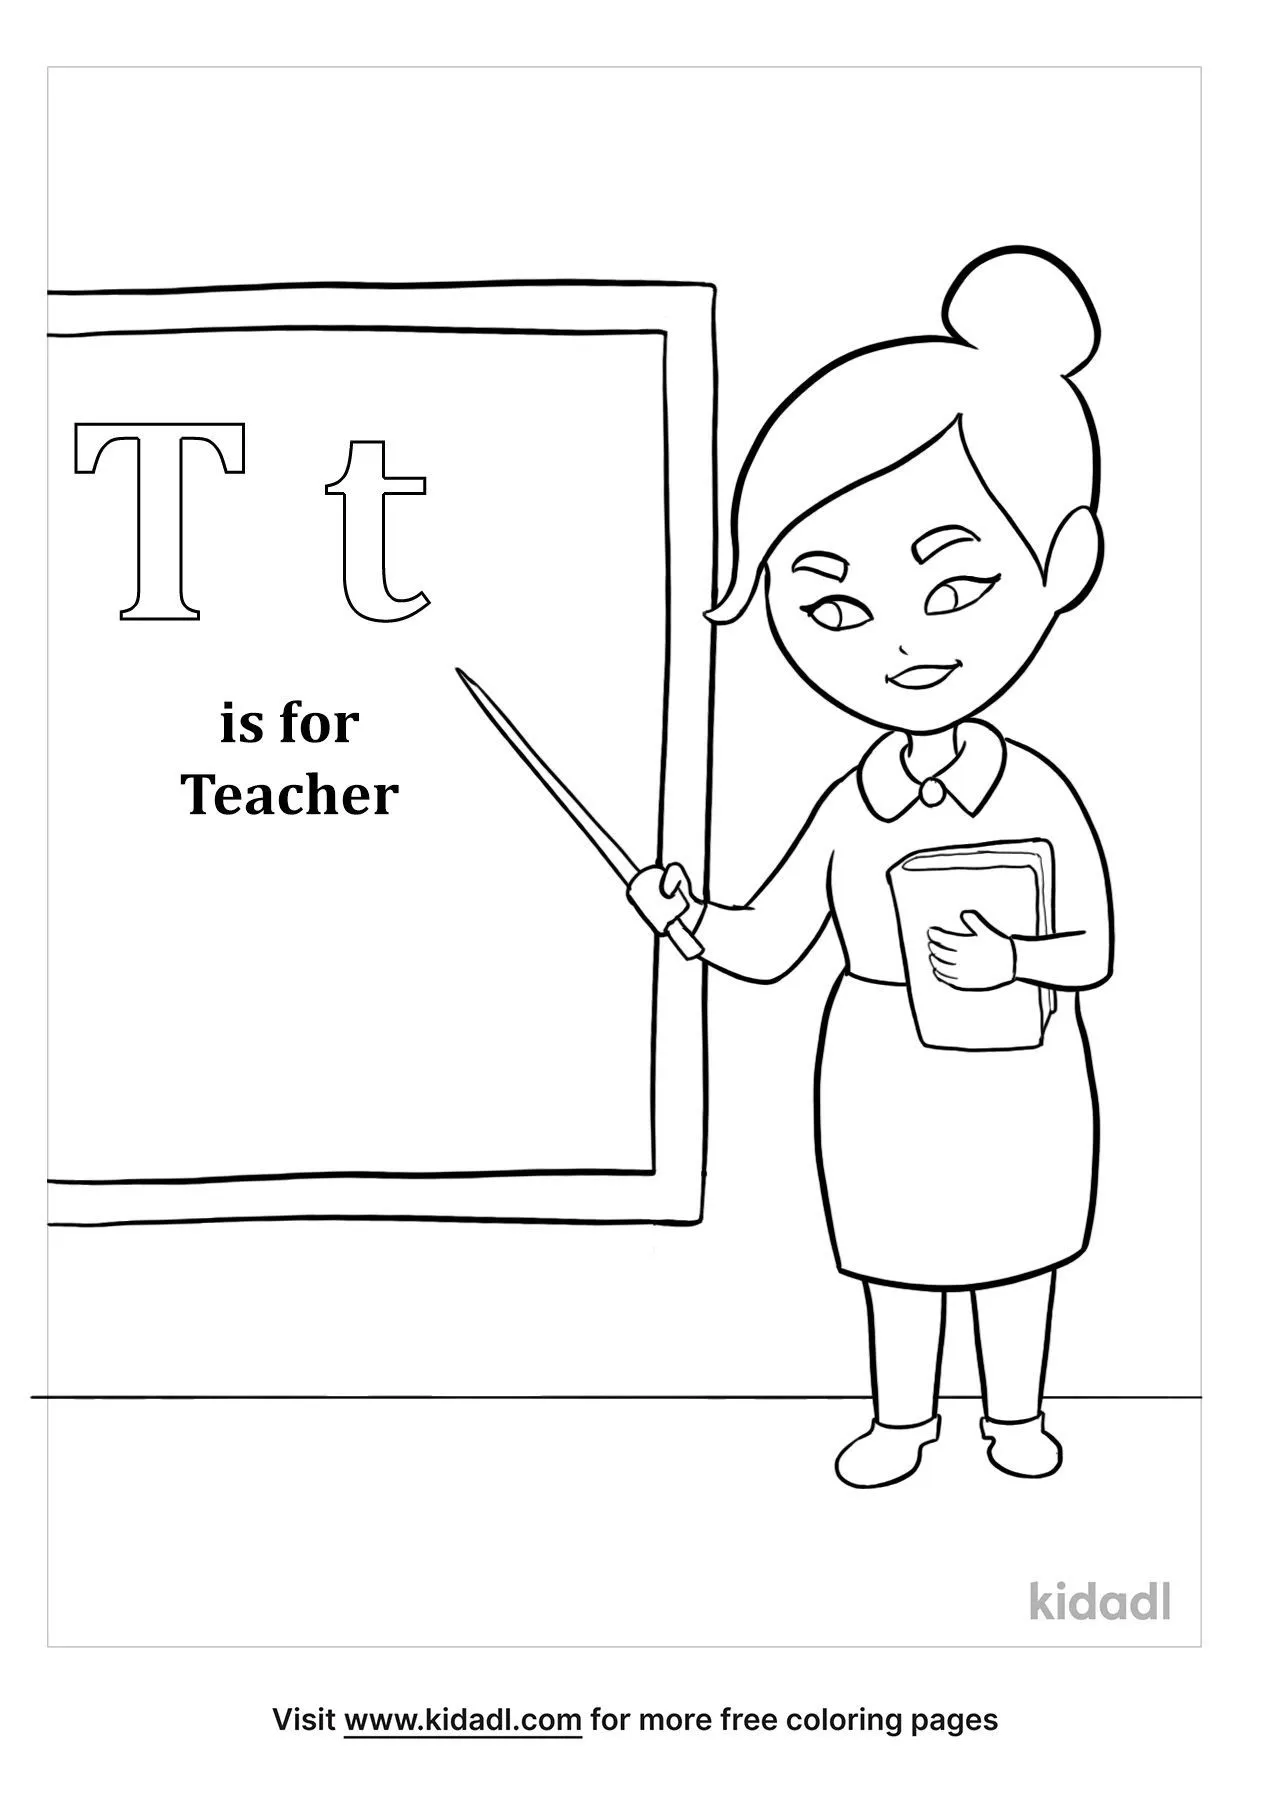 Teacher Coloring Pages / 1 : Worlds best teacher coloring page. - Asd10